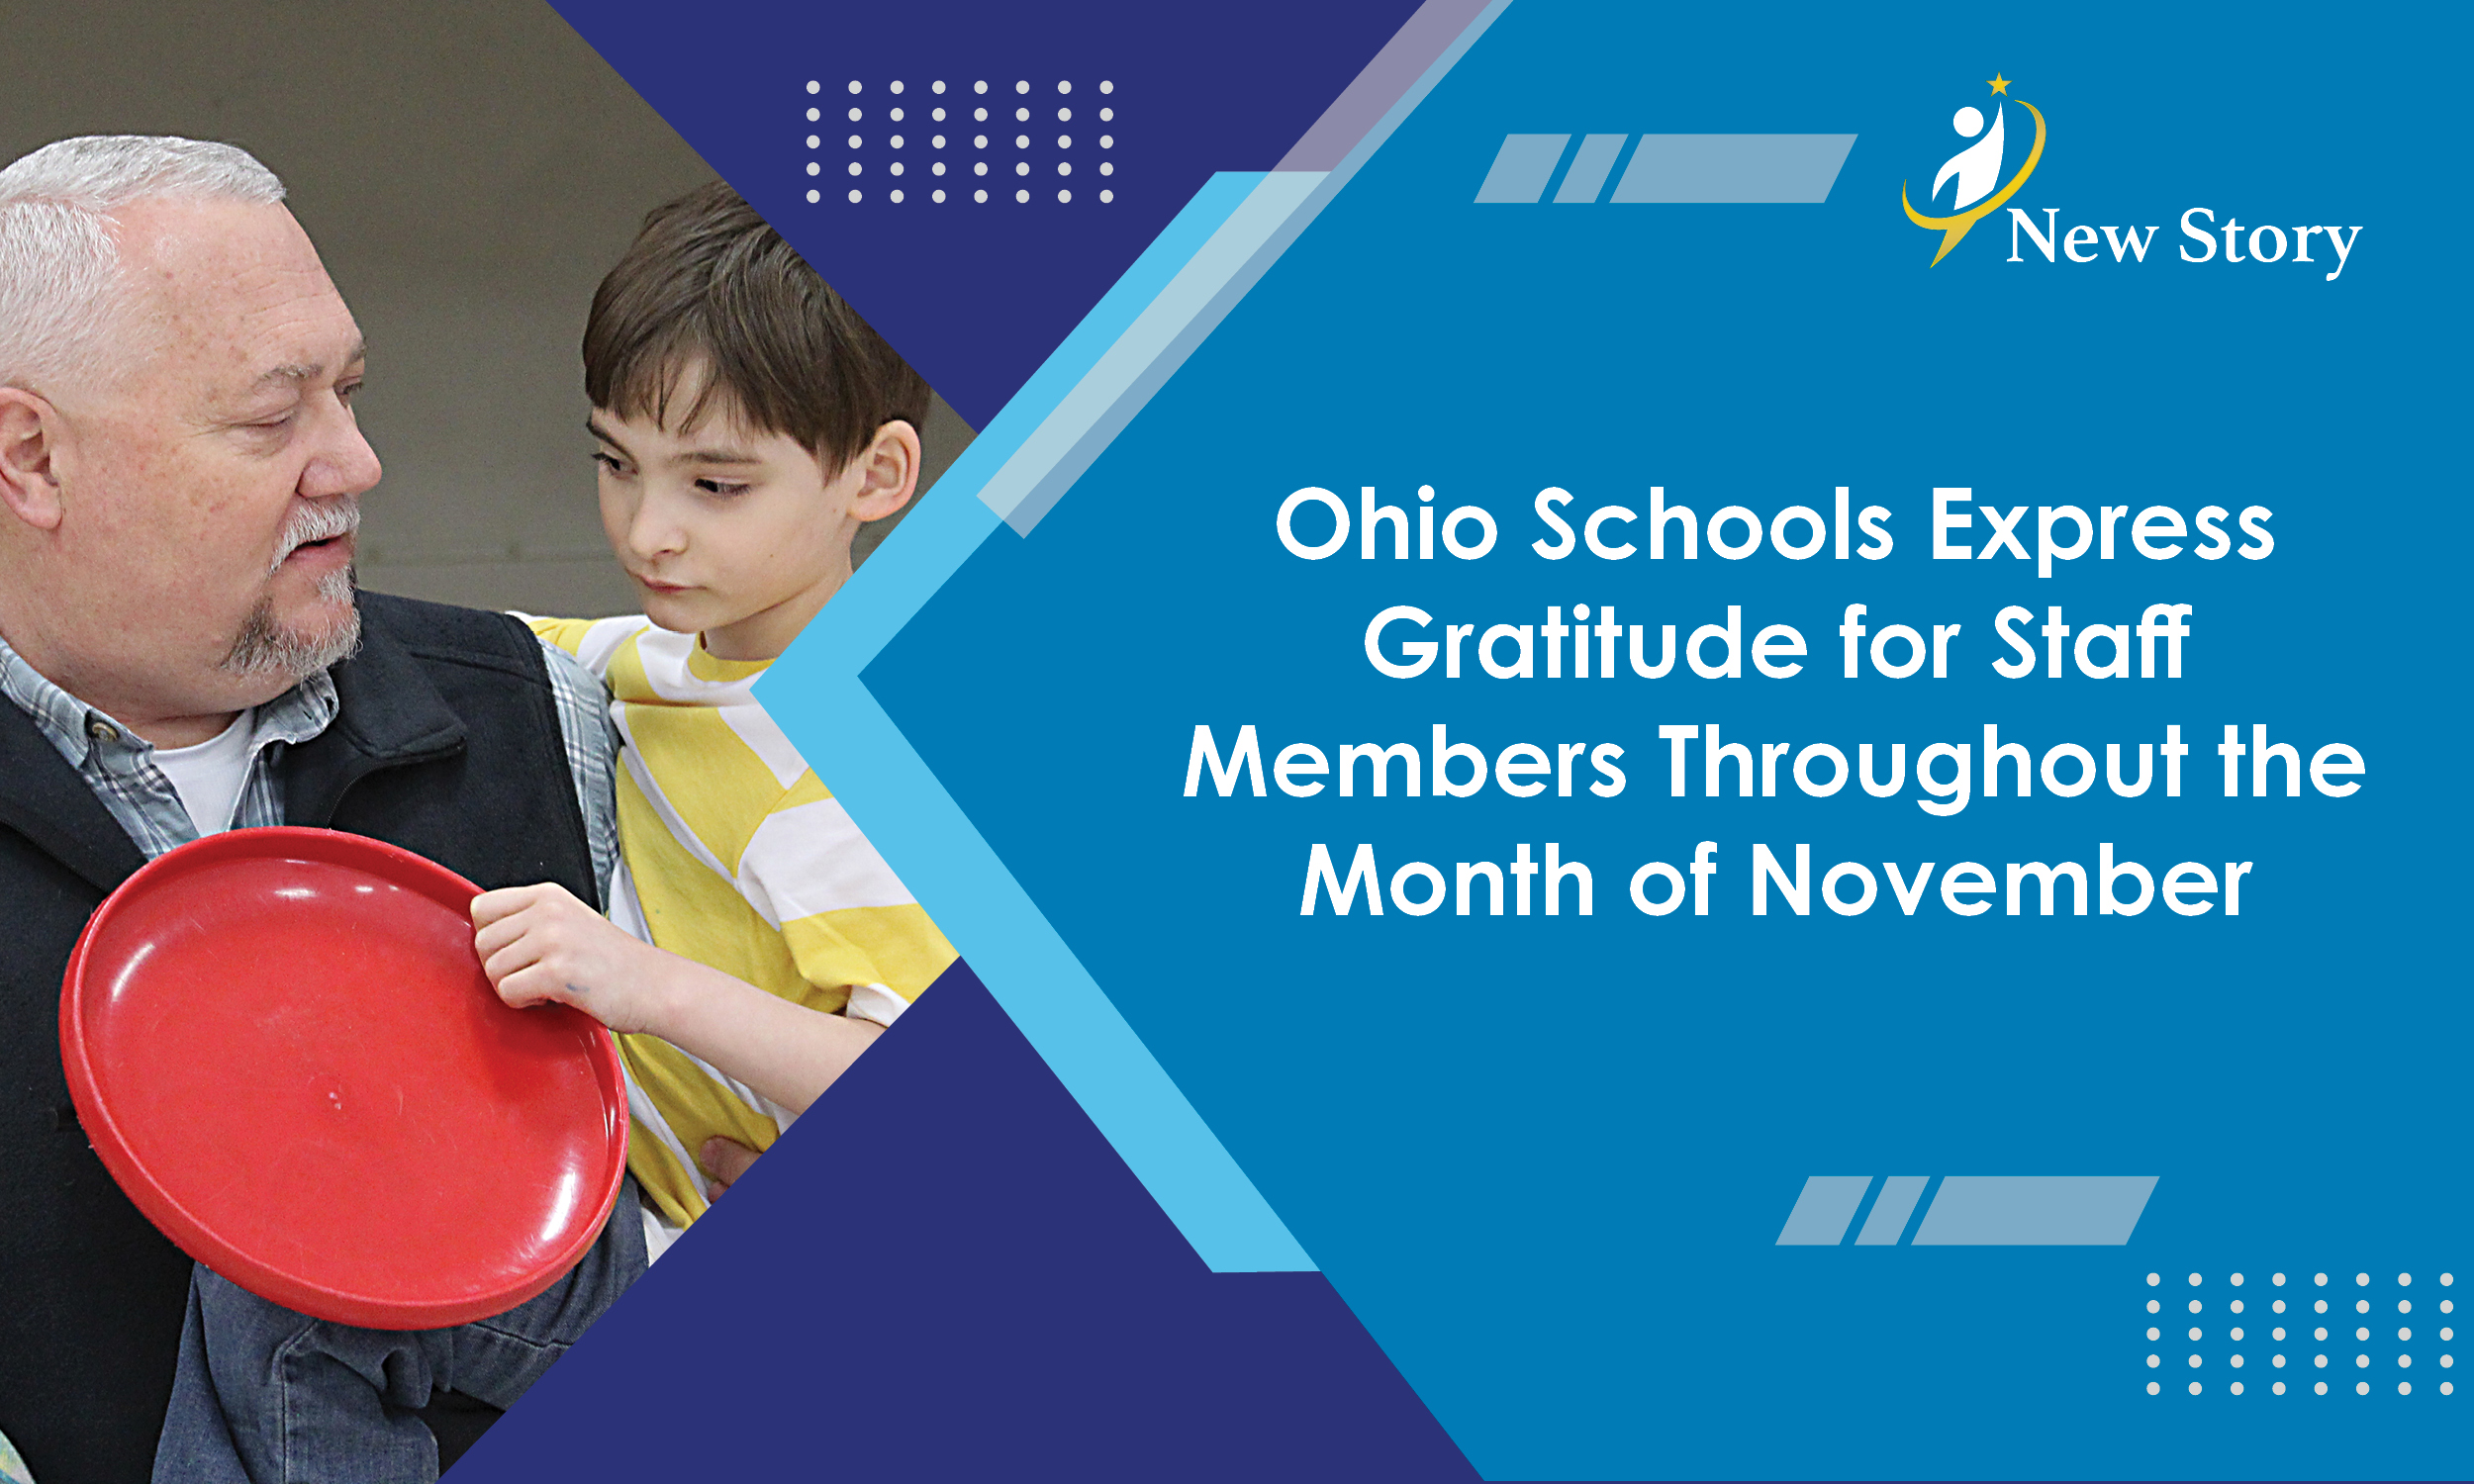 Ohio Schools Express Gratitude for Staff Members Throughout the Month of November